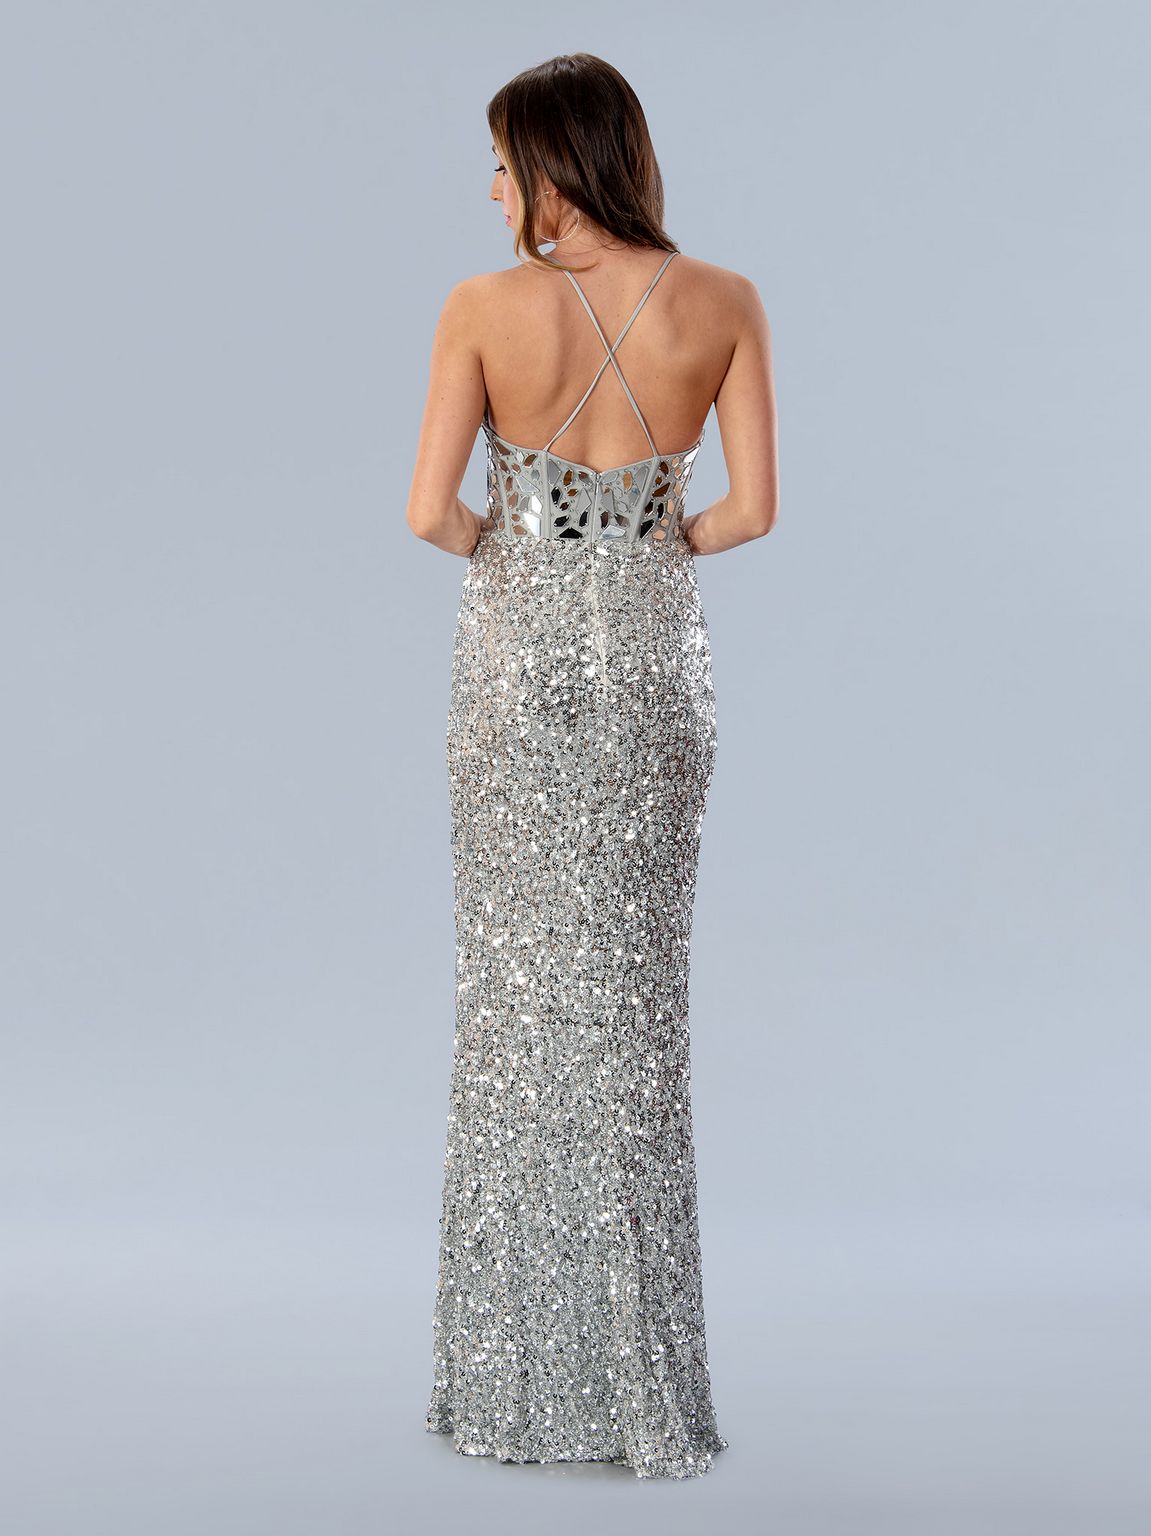 Prom Dresses Sequin Formal Long Mirror Beaded Prom Dress Silver